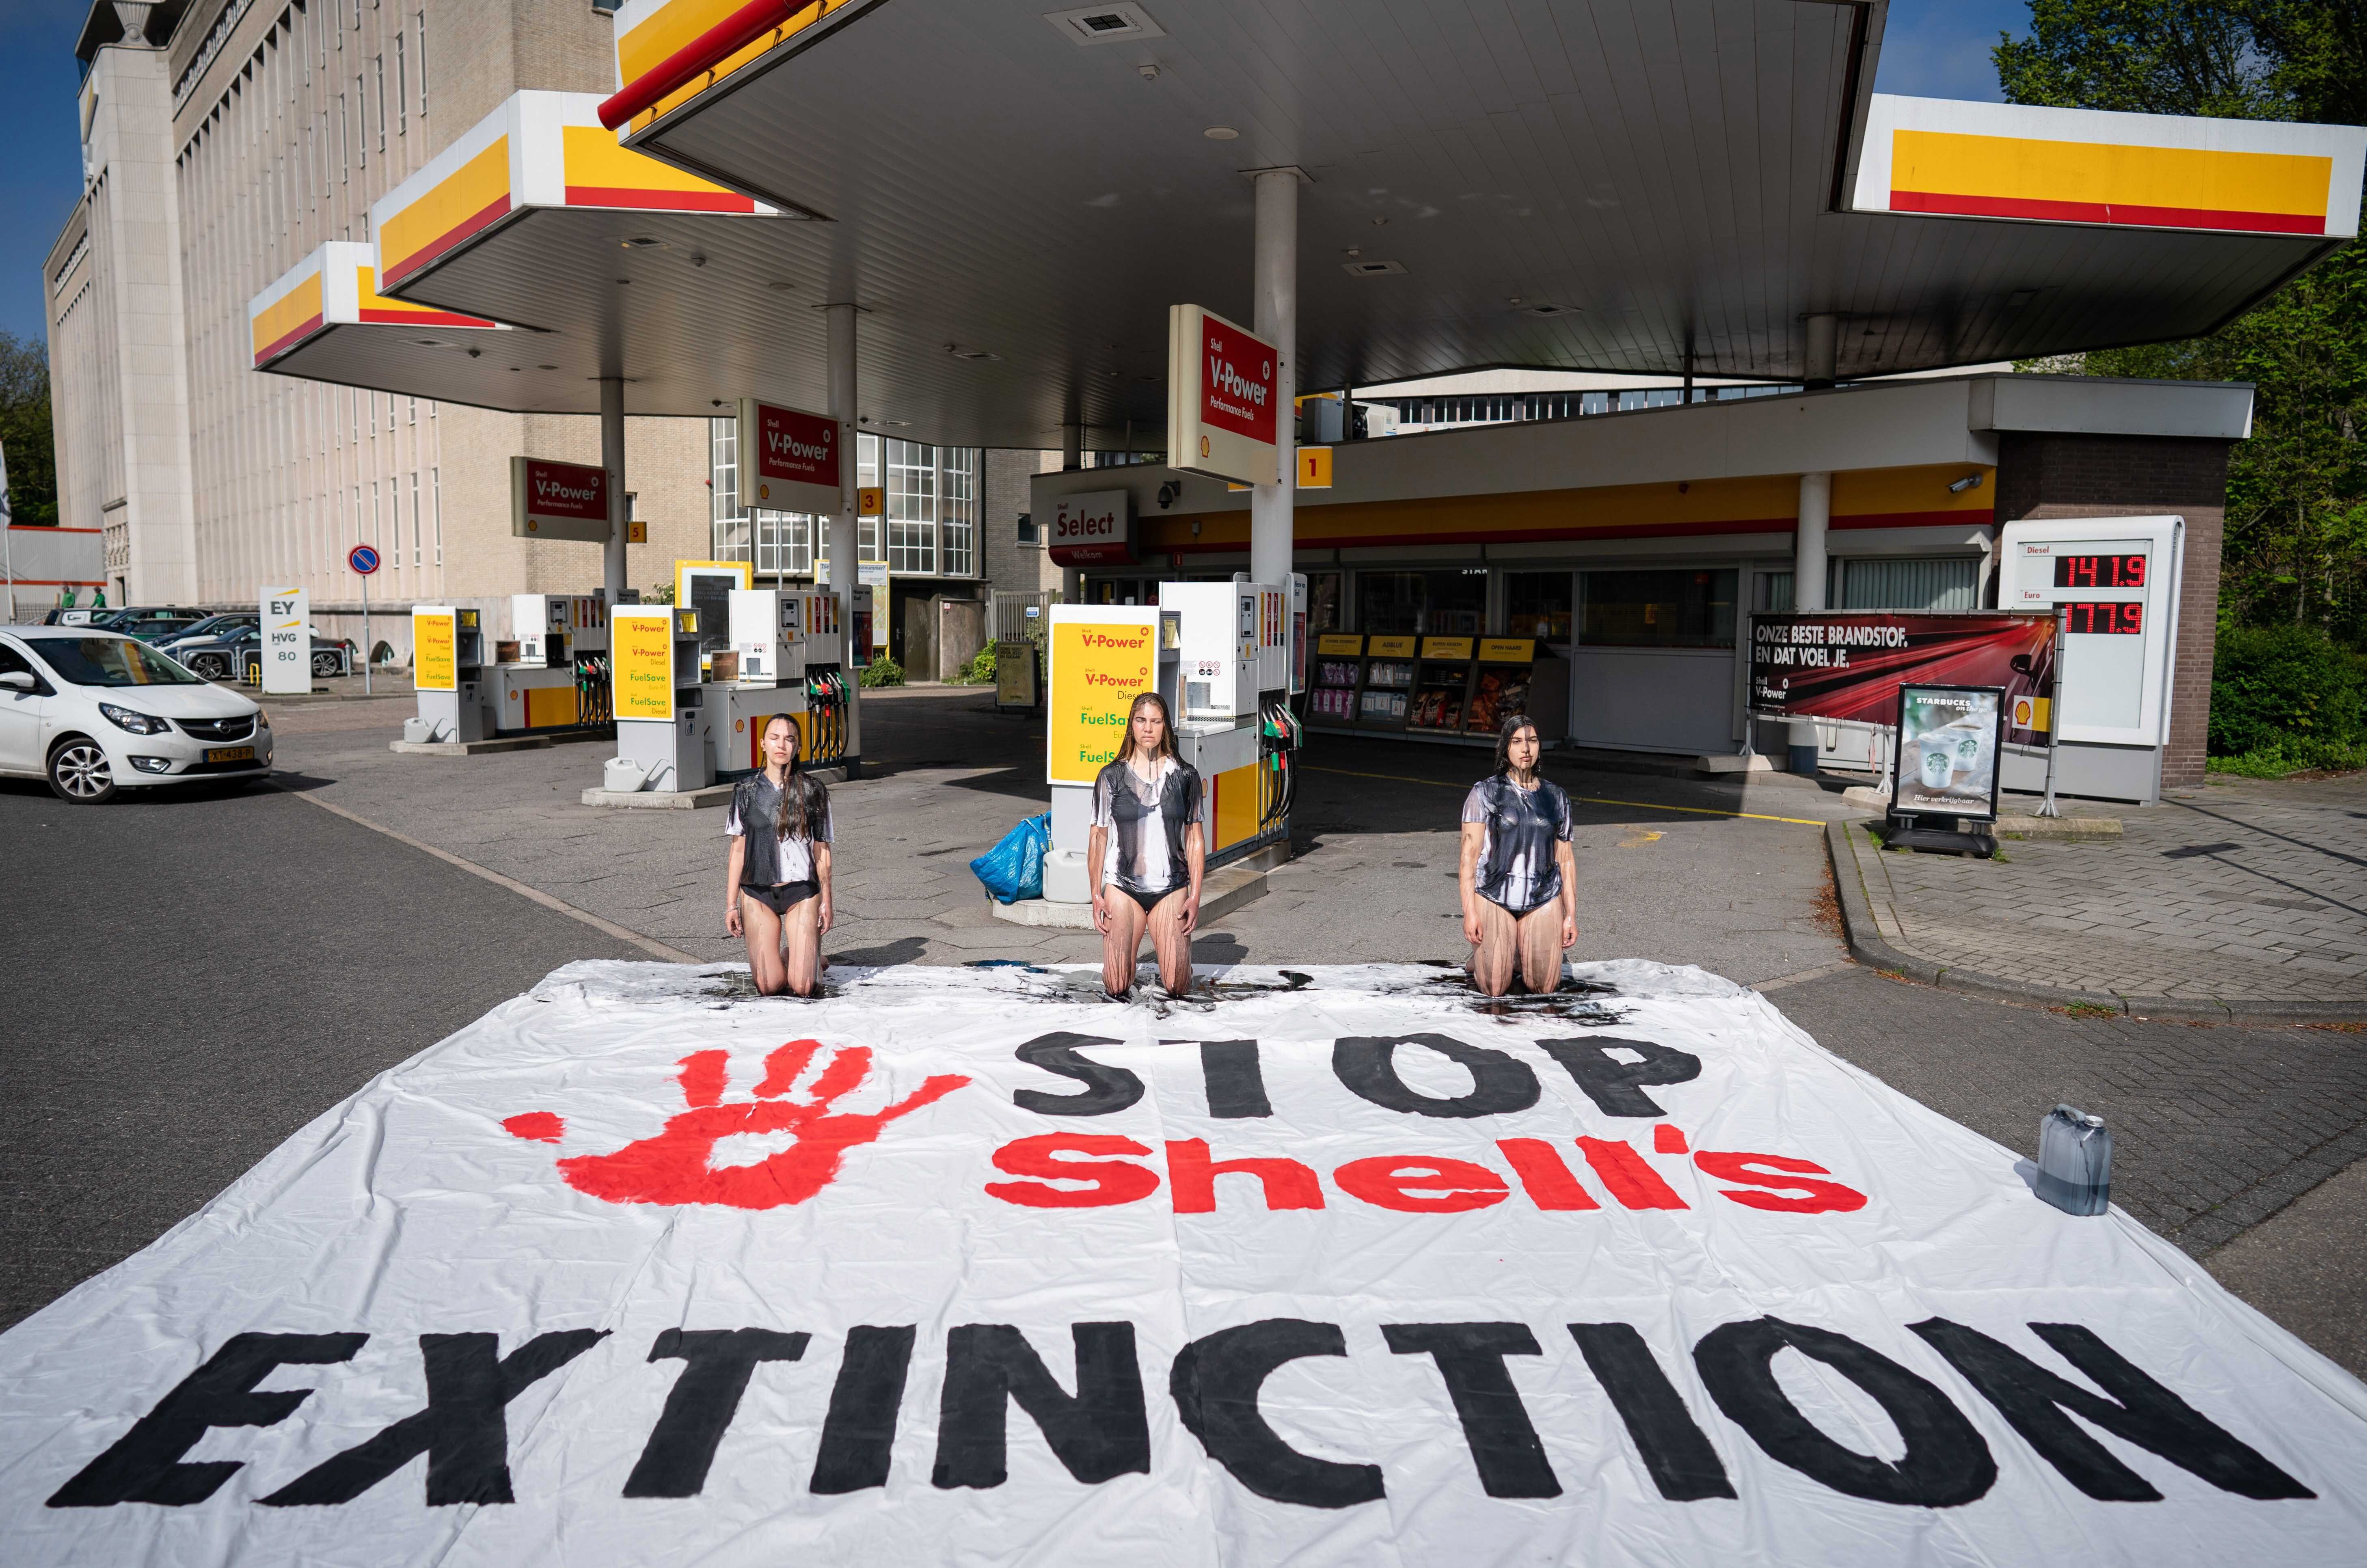 Environmentalists protest at a Shell gas station in The Hague, Netherlands. Photo: EPA-EFE